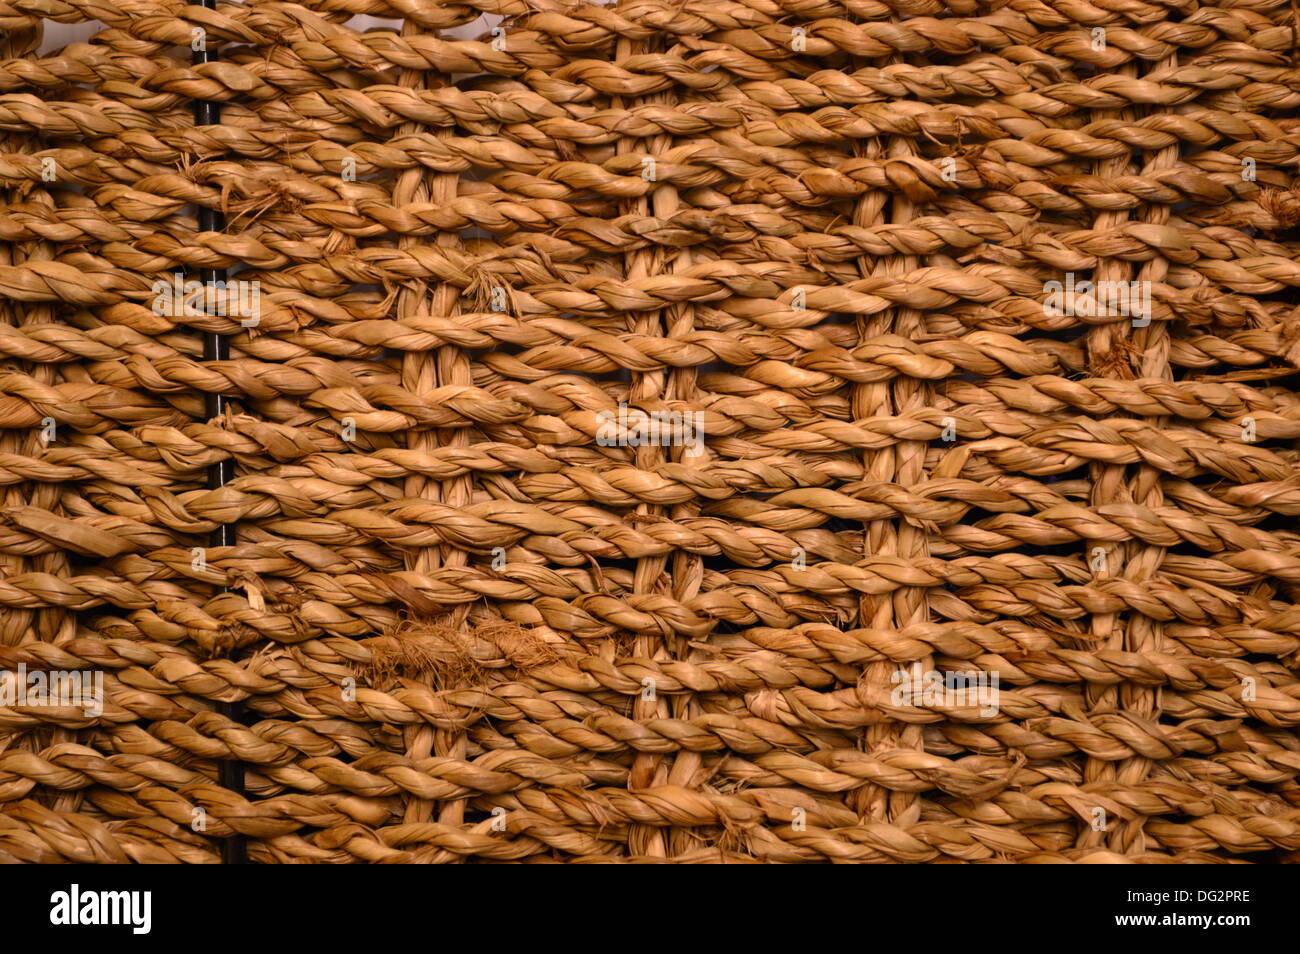 Wicker weaving for backgrounds or texture Stock Photo